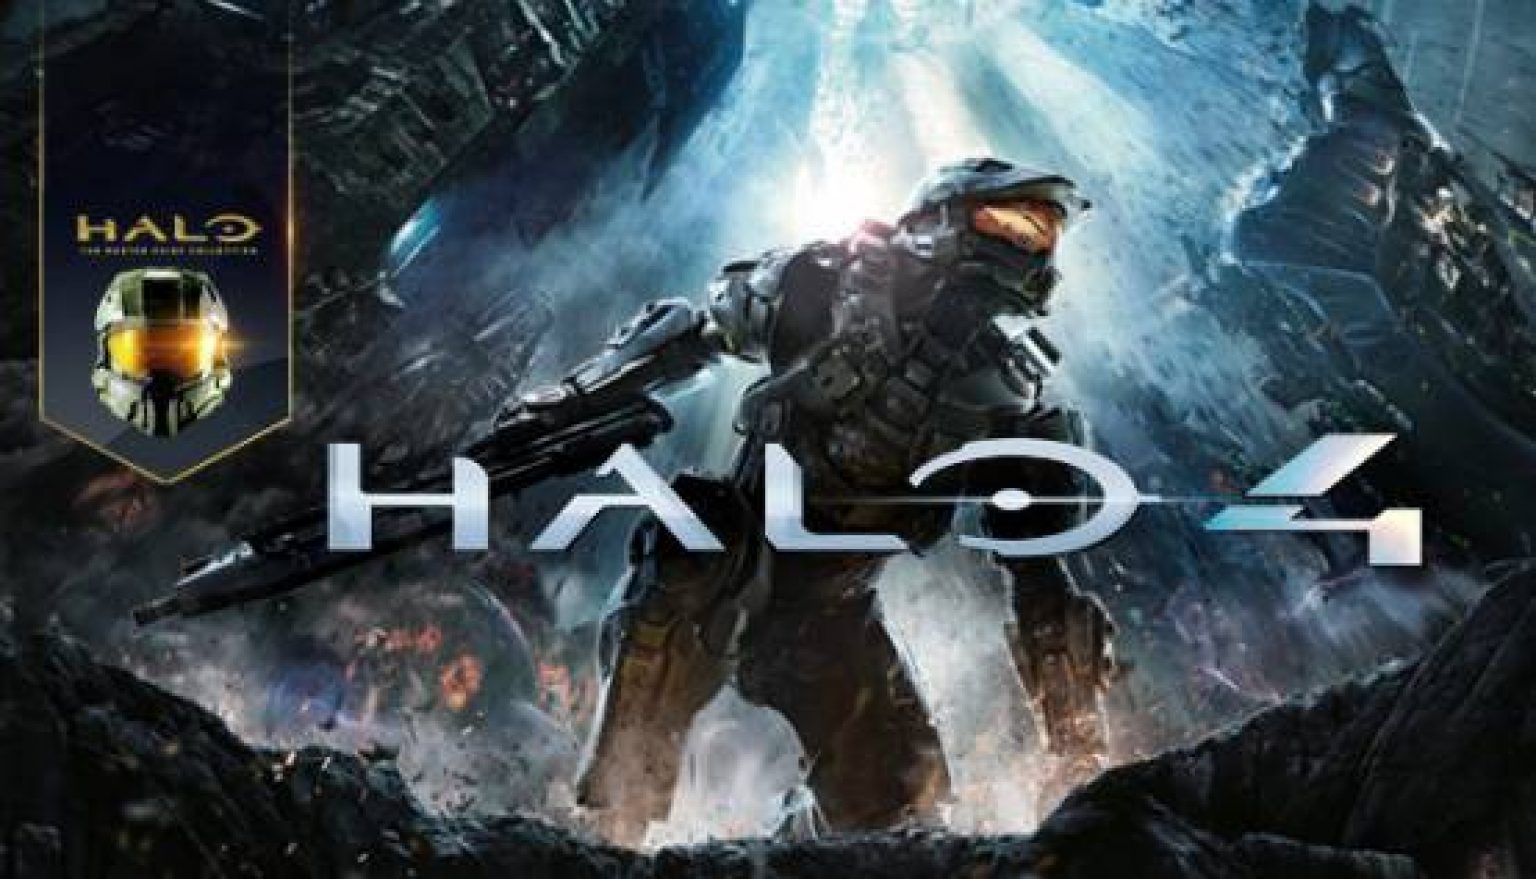 halo 4 pc free download full game